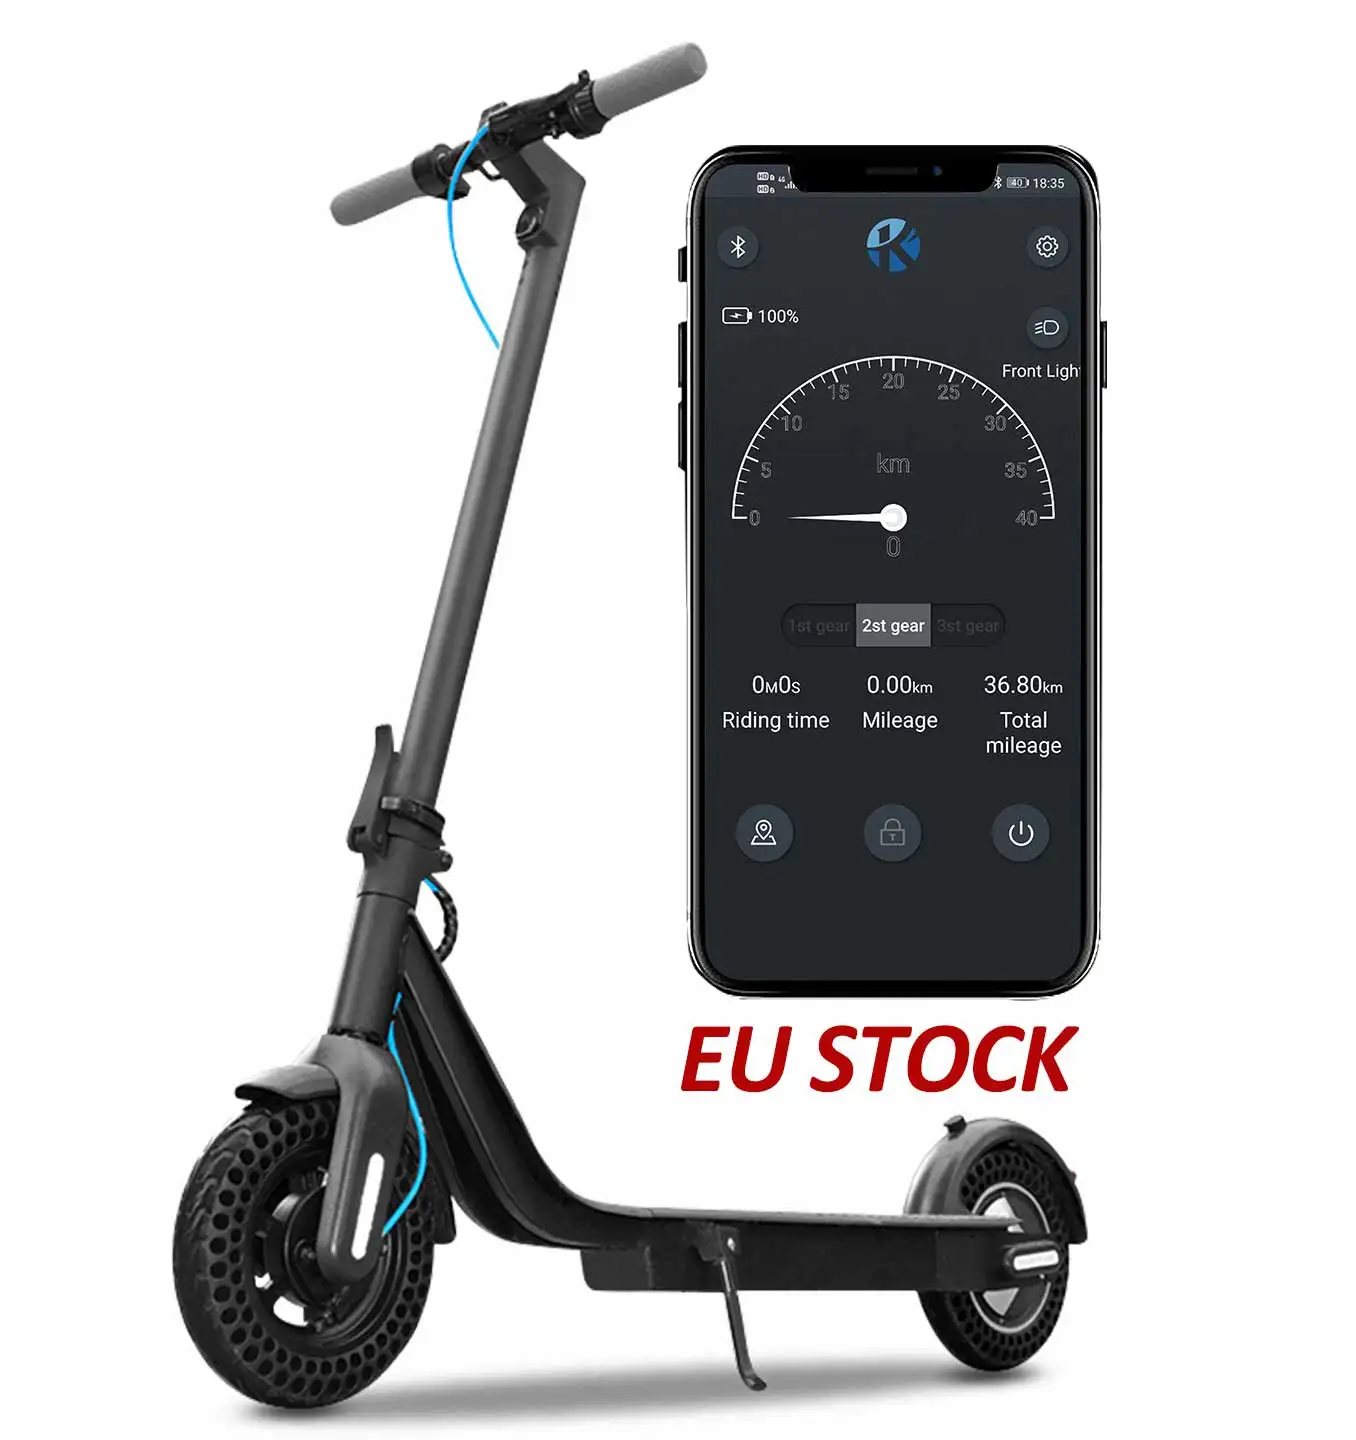 

2021 Europe Warehouse Stock Moped Scooter Electric Monopattino Electrico 1 Years Warranty 10 Inch Scooter